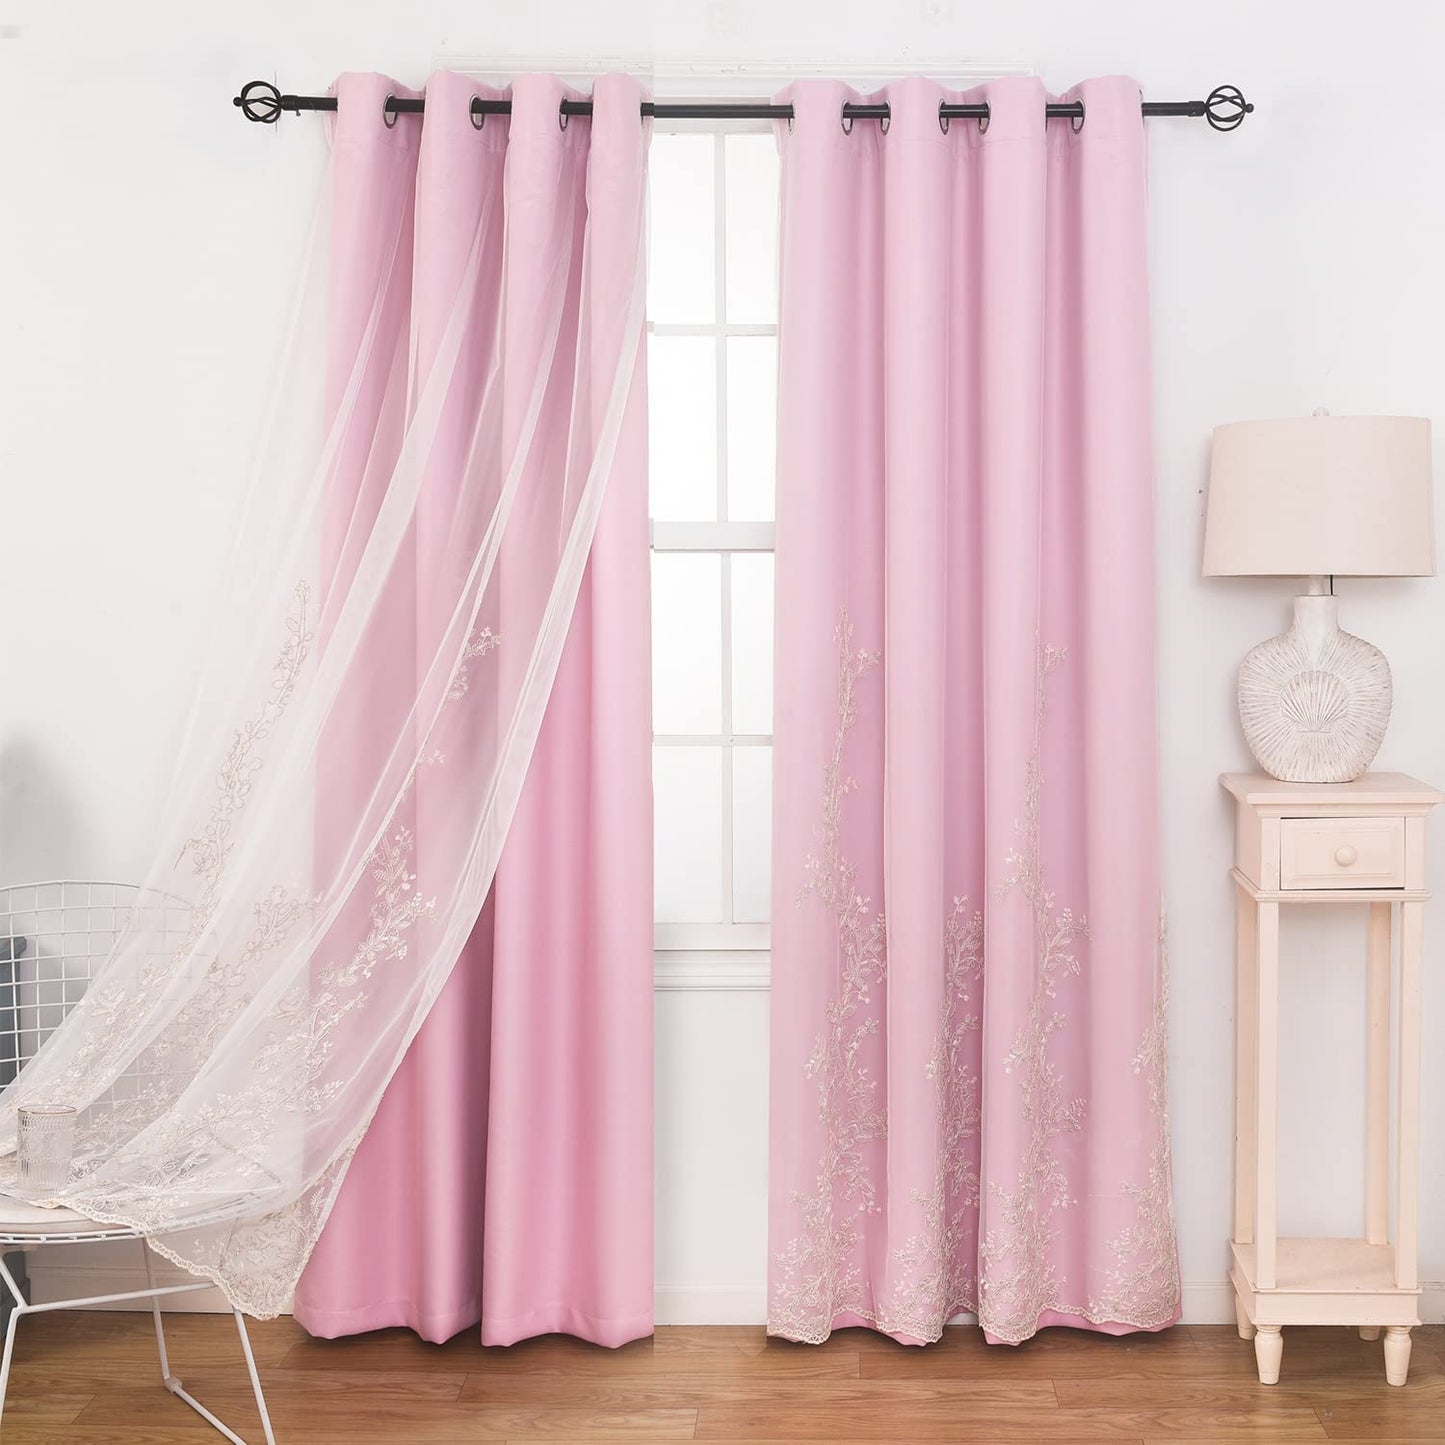 Double Layer Curtains With Embroiered Sheer Voile Room Darkening Grommet Top Drapes for Girls